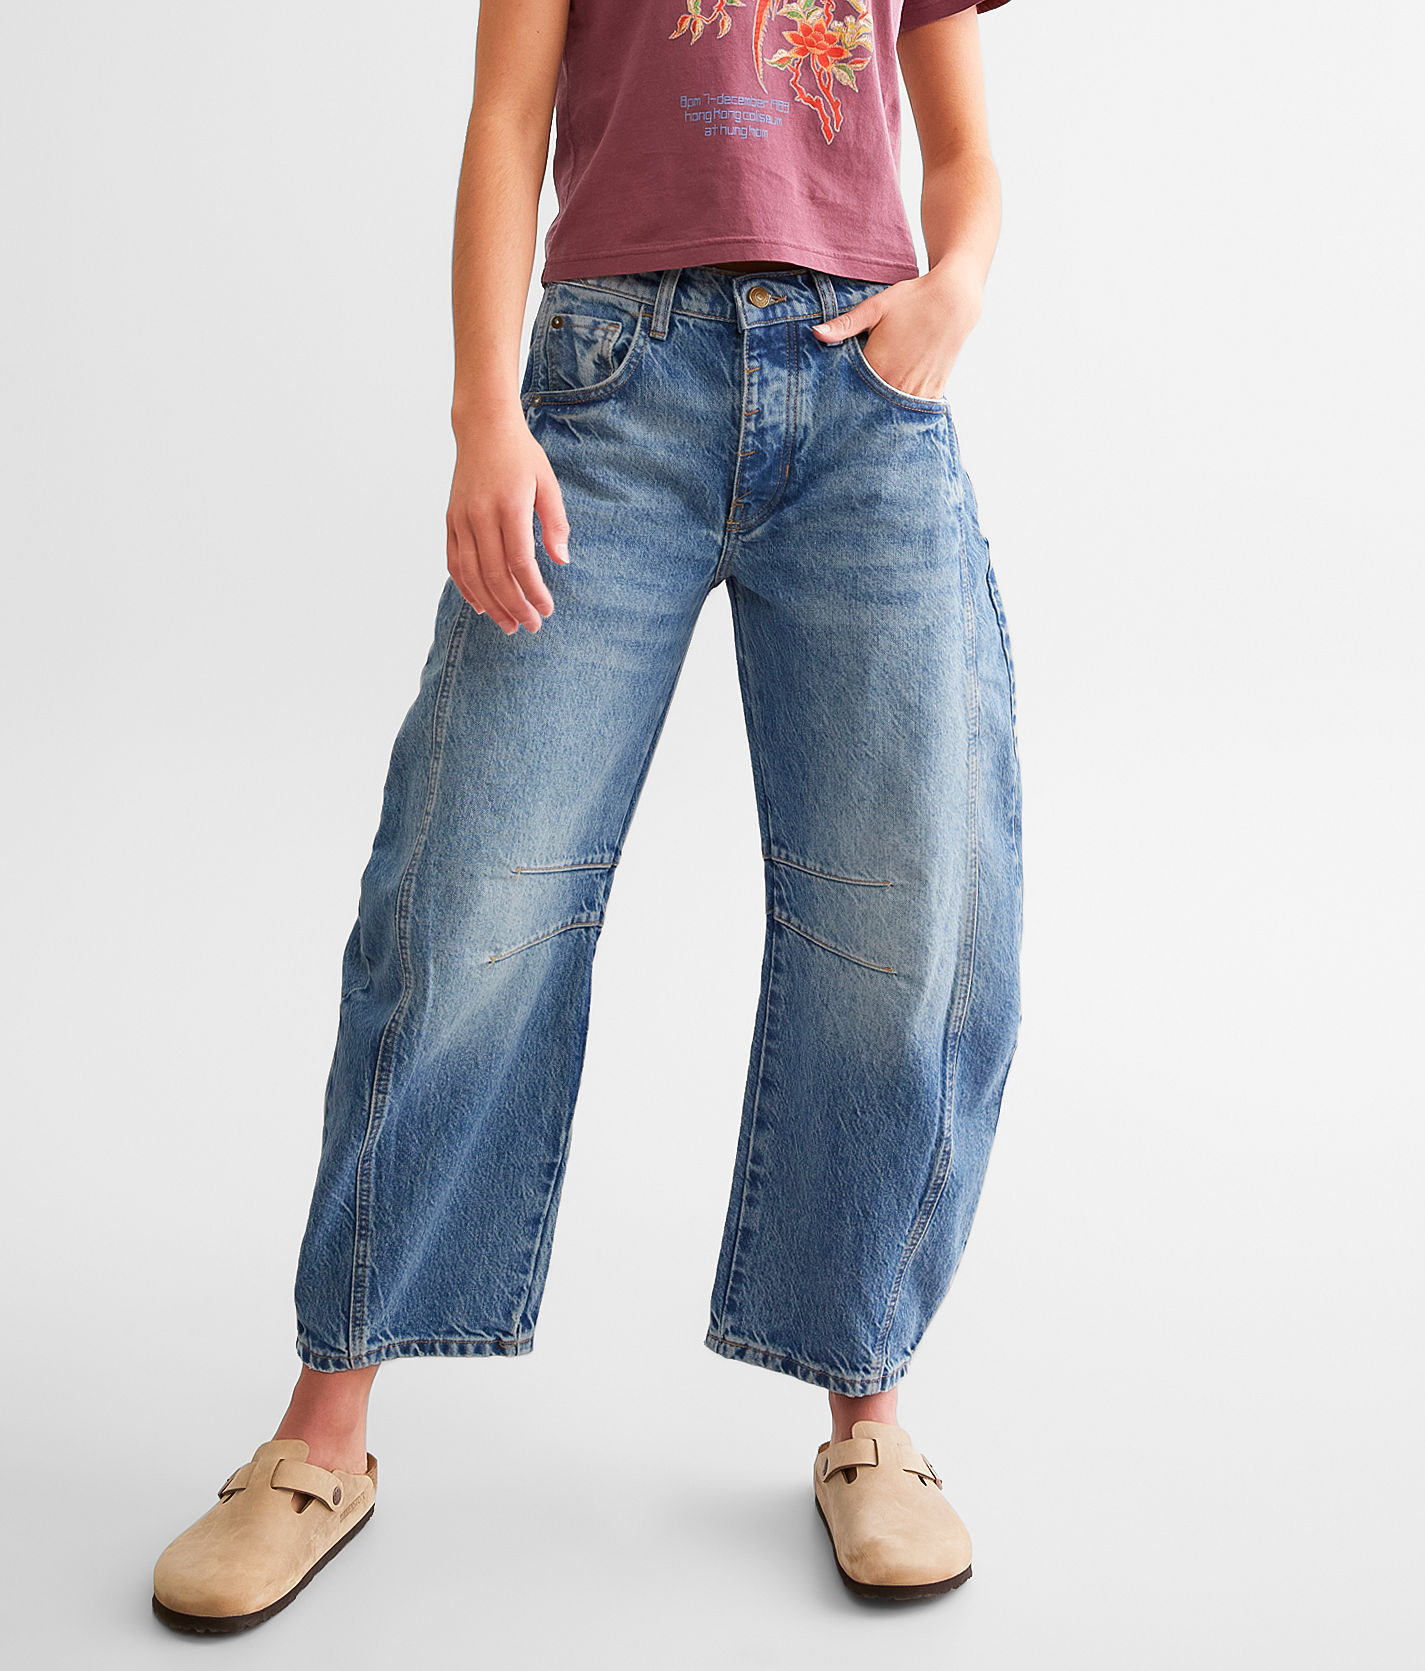 Obsessed with these barrel jeans from @Free People perfect